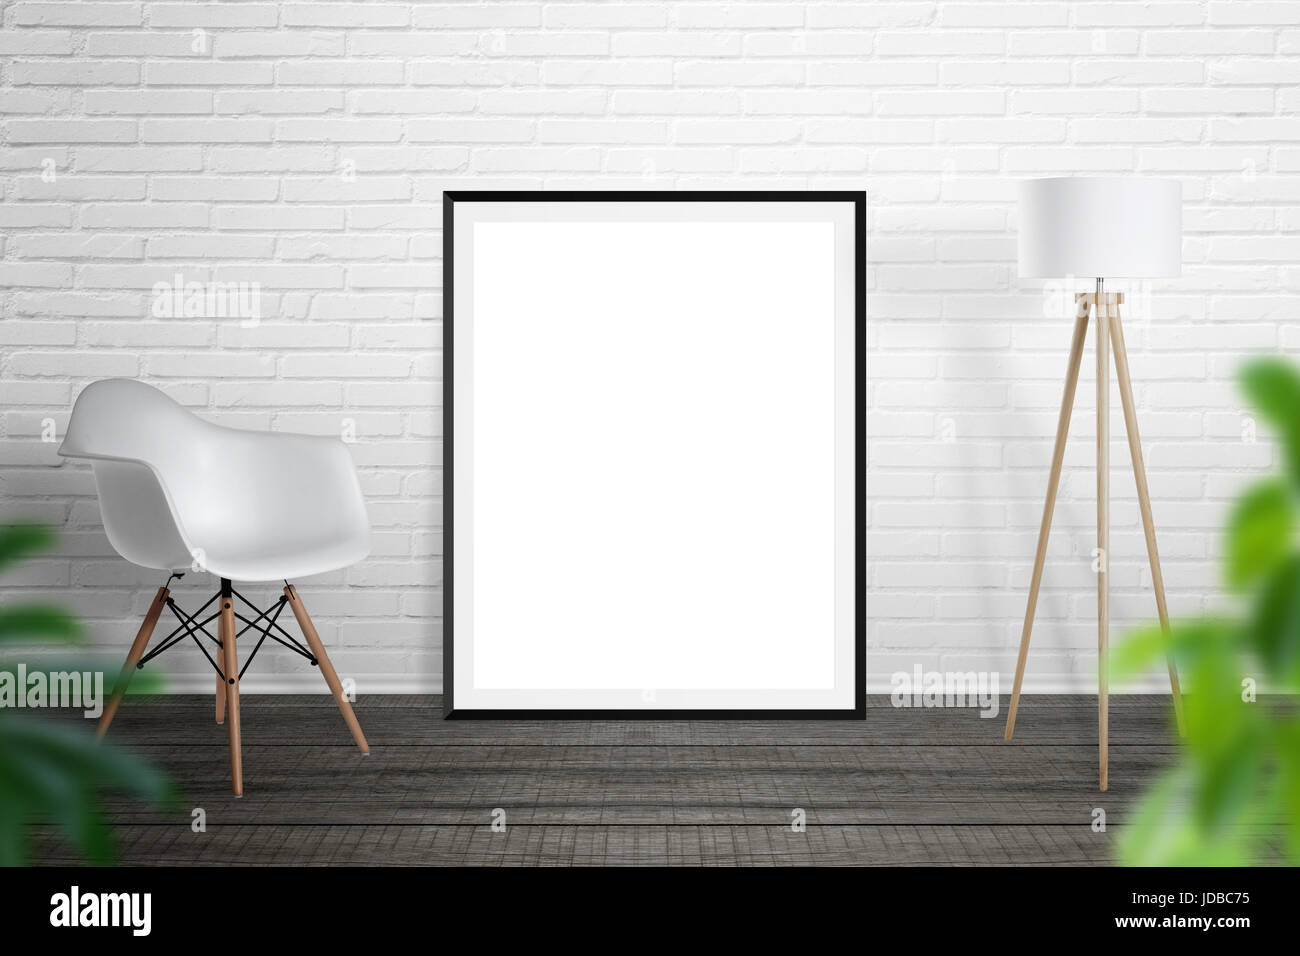 Empty picture frame leaned on brick wall. Chair and lamp beside. Stock Photo